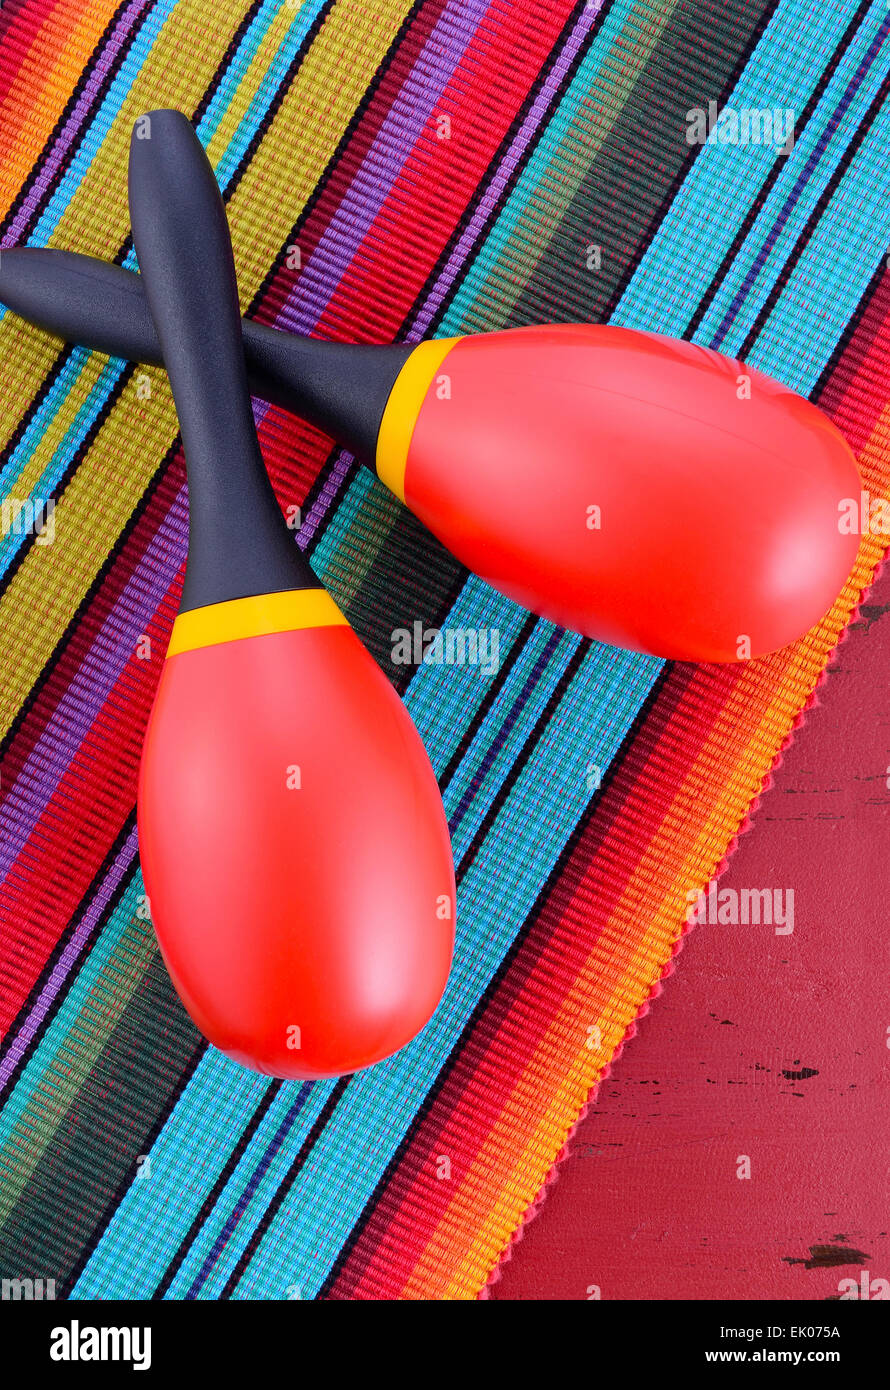 Happy Cinco de Mayo background with red and yellow maracas on Mexican style fabric and distressed red wood table. Stock Photo